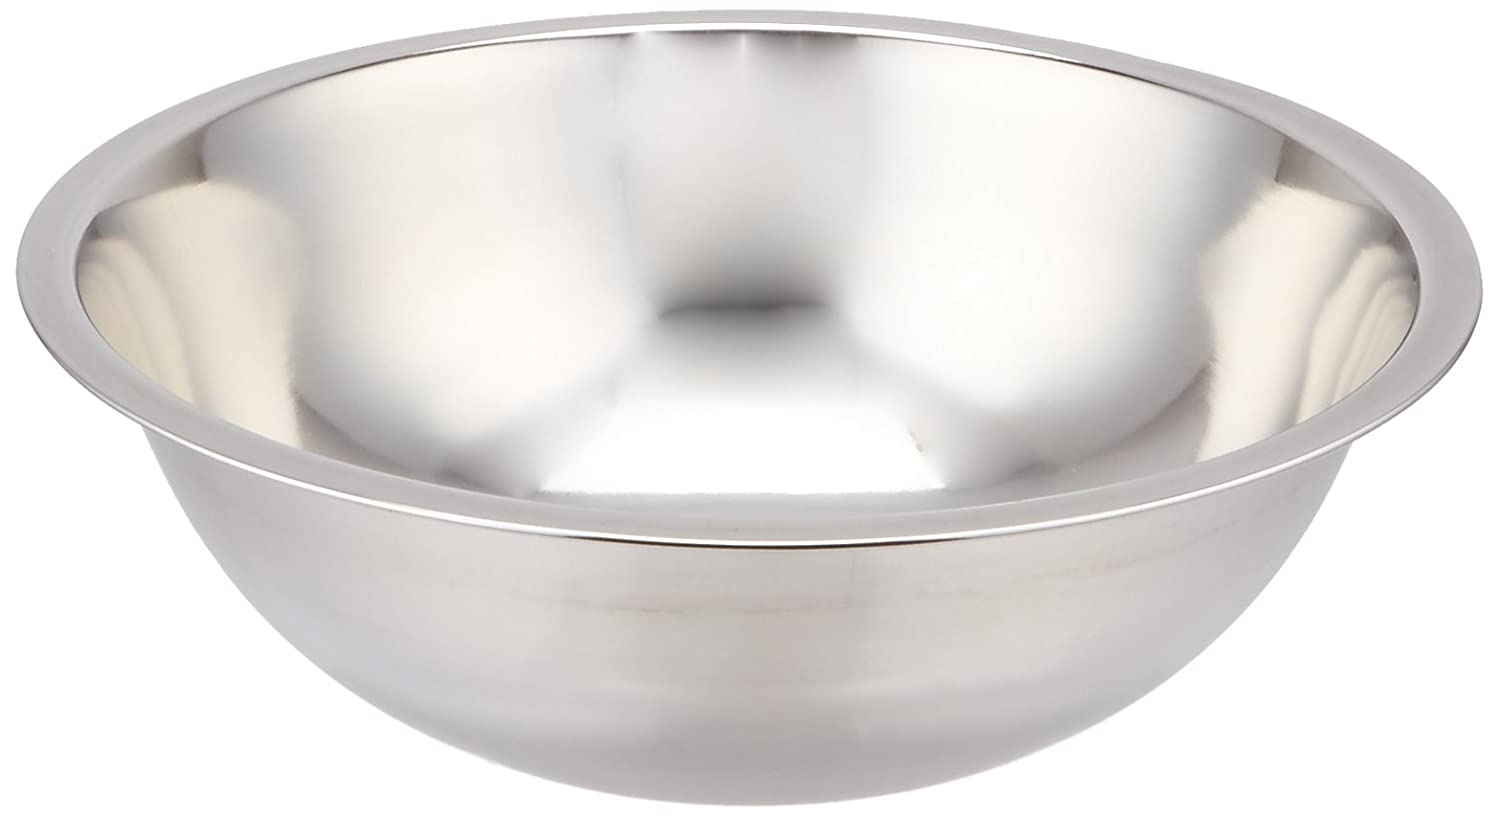 Winco 3-Quart Stainless Steel Bowl $2.09